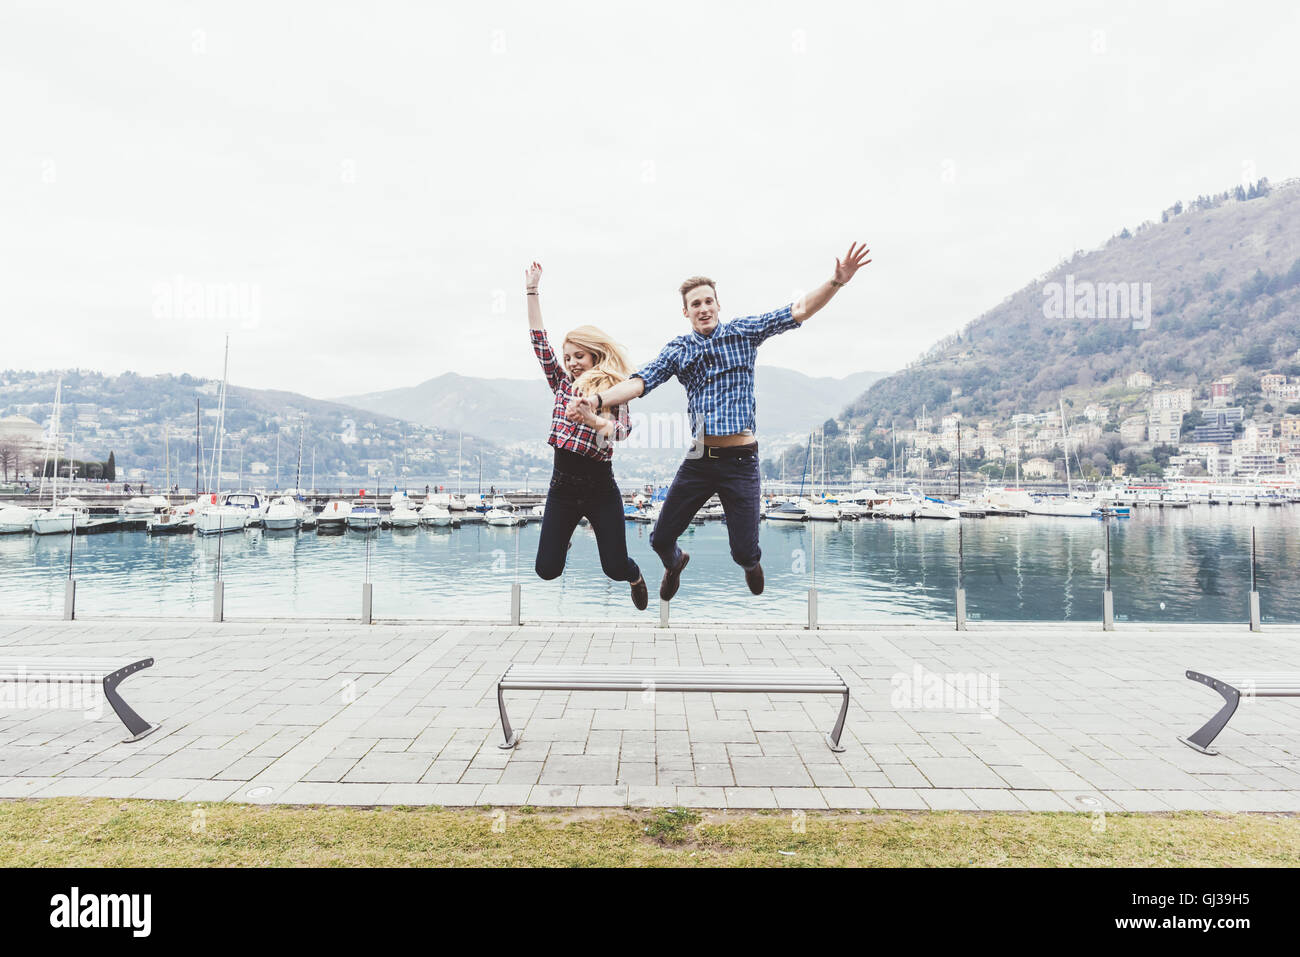 Young couple on waterfront jumping mid air,  Lake Como, Italy Stock Photo